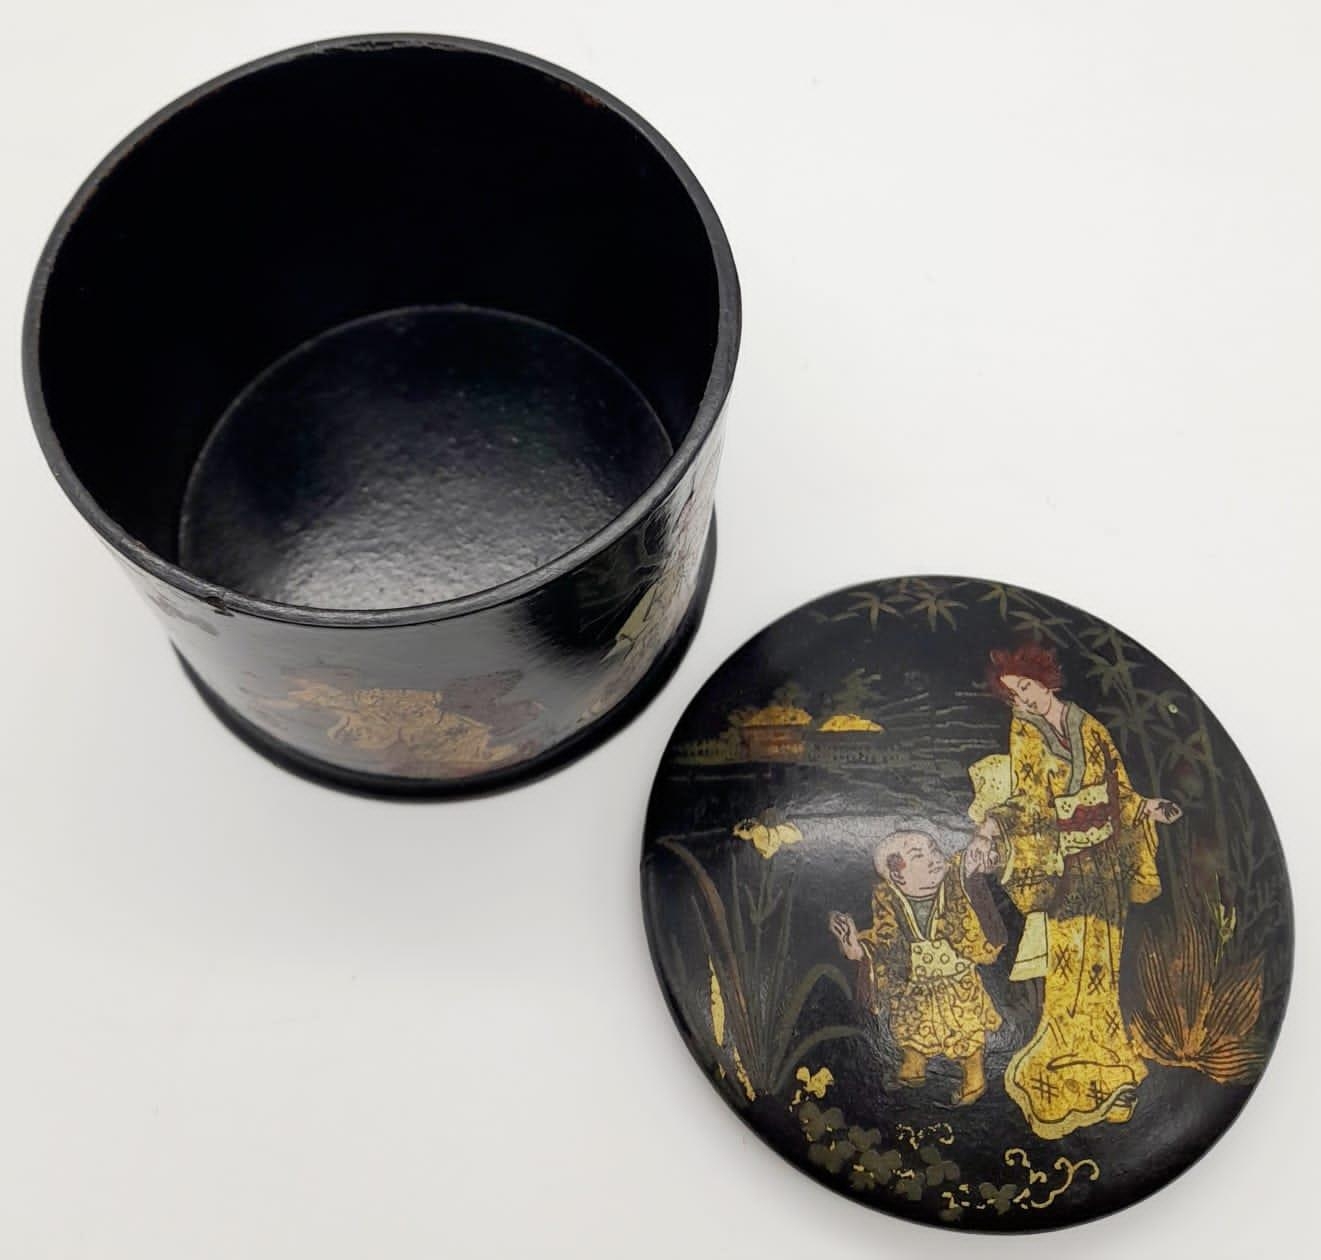 An Antique Chinese Black Lacquer Box. Wonderful decoration with gold on black depicting Mothers at - Image 3 of 7